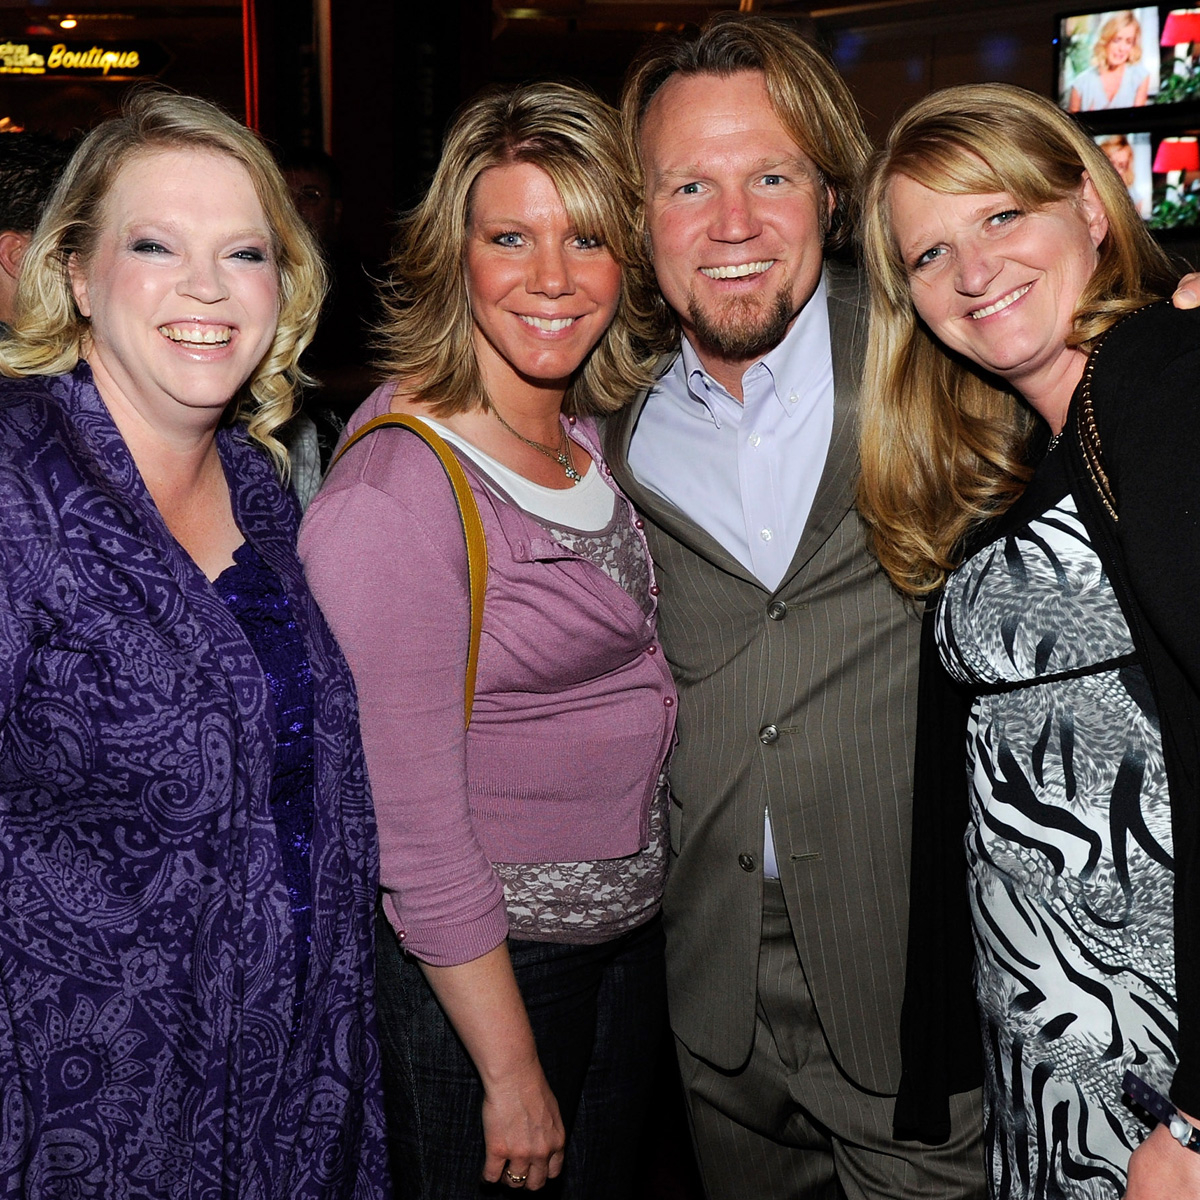 Sister Wives’ Stars Reflect on Relationship With Kody Brown